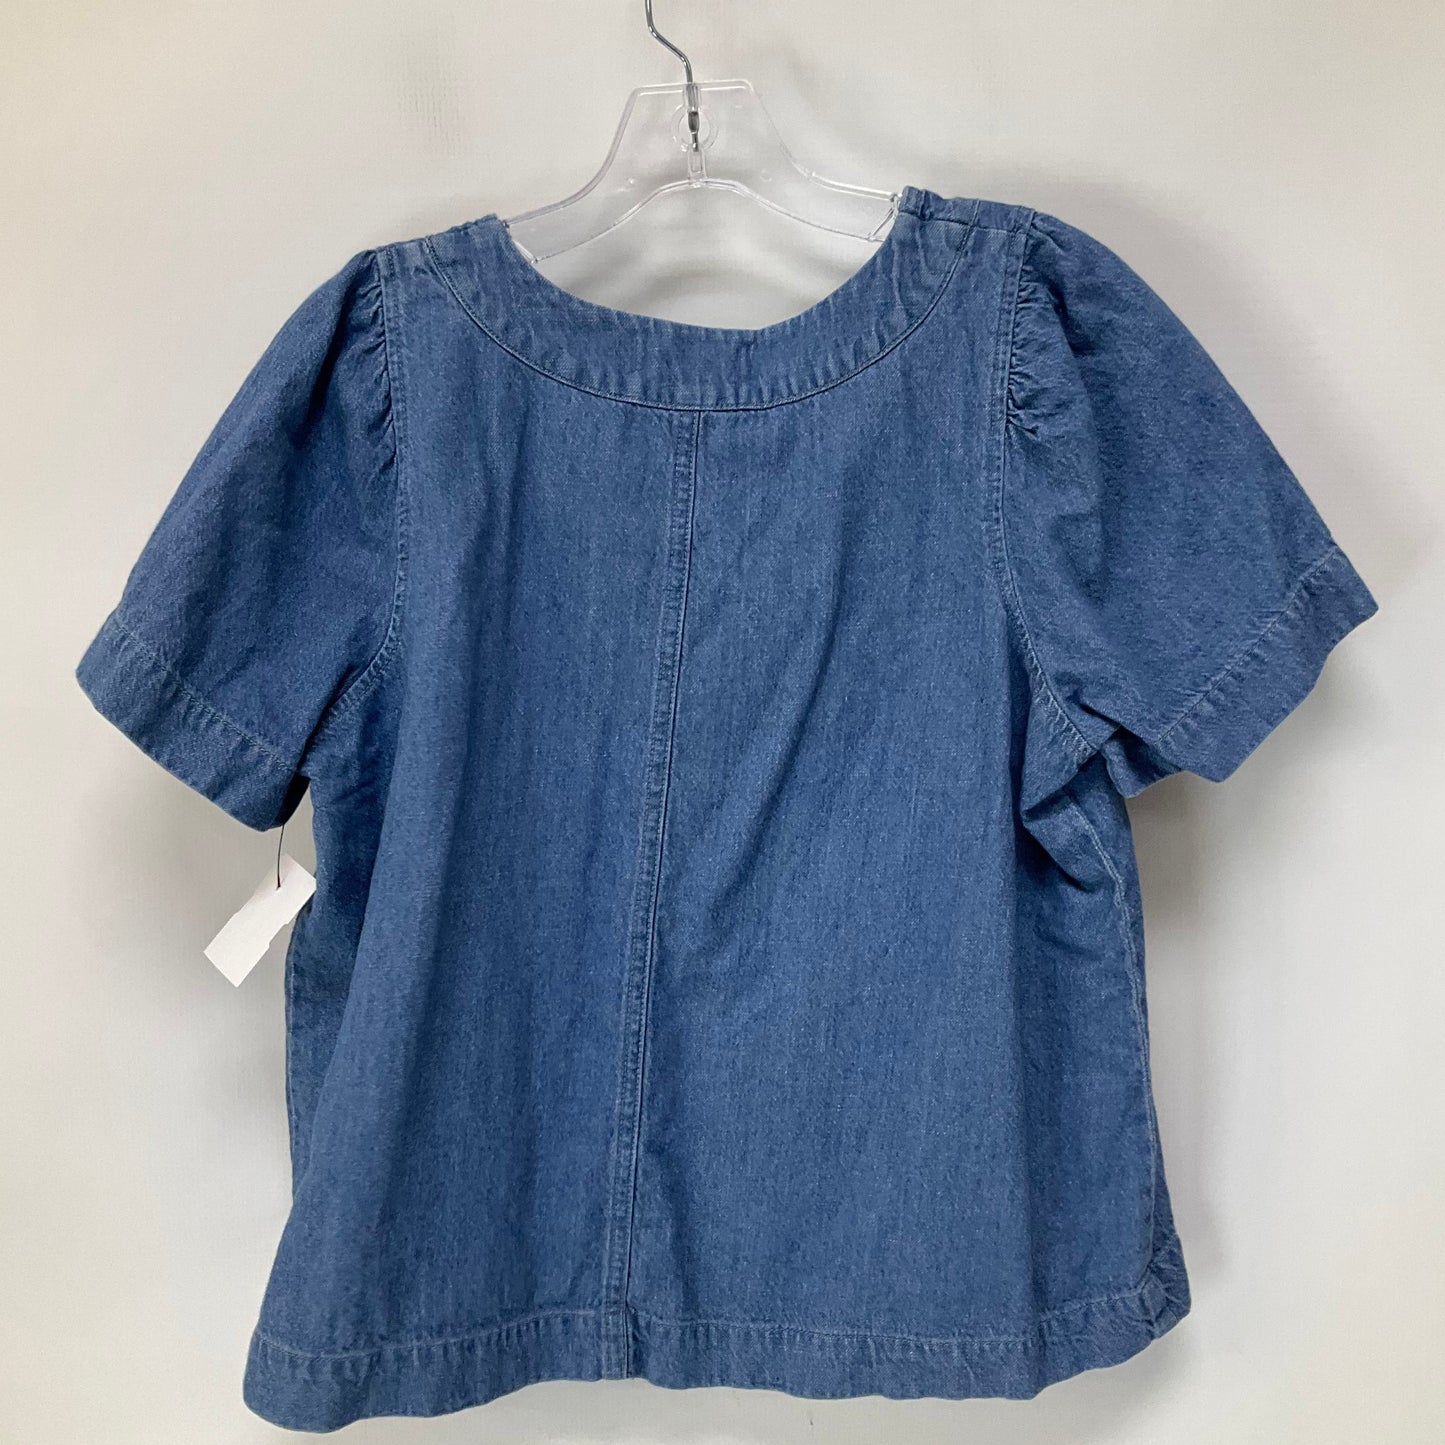 Blue Top Short Sleeve Madewell, Size M